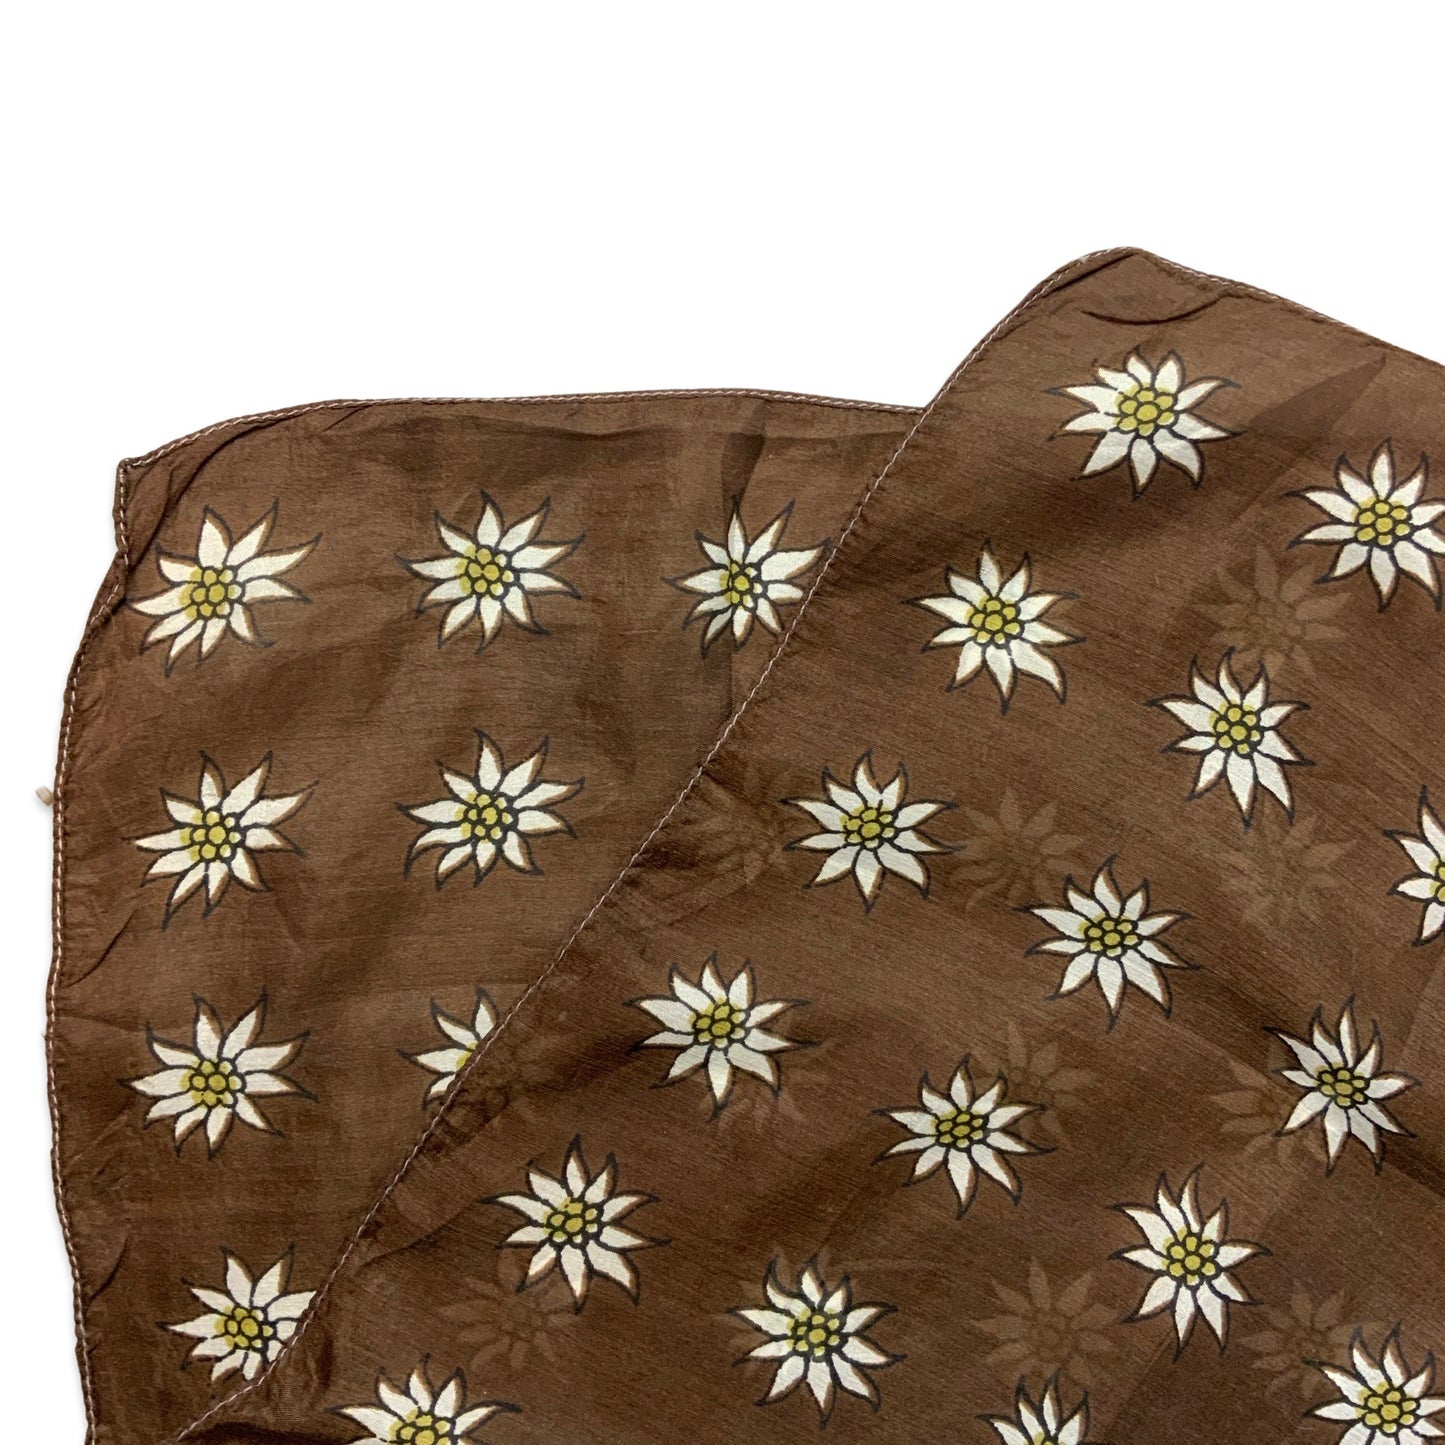 70s Vintage Brown White Yellow Dutch Daisy Edelweiss Flower Scarf